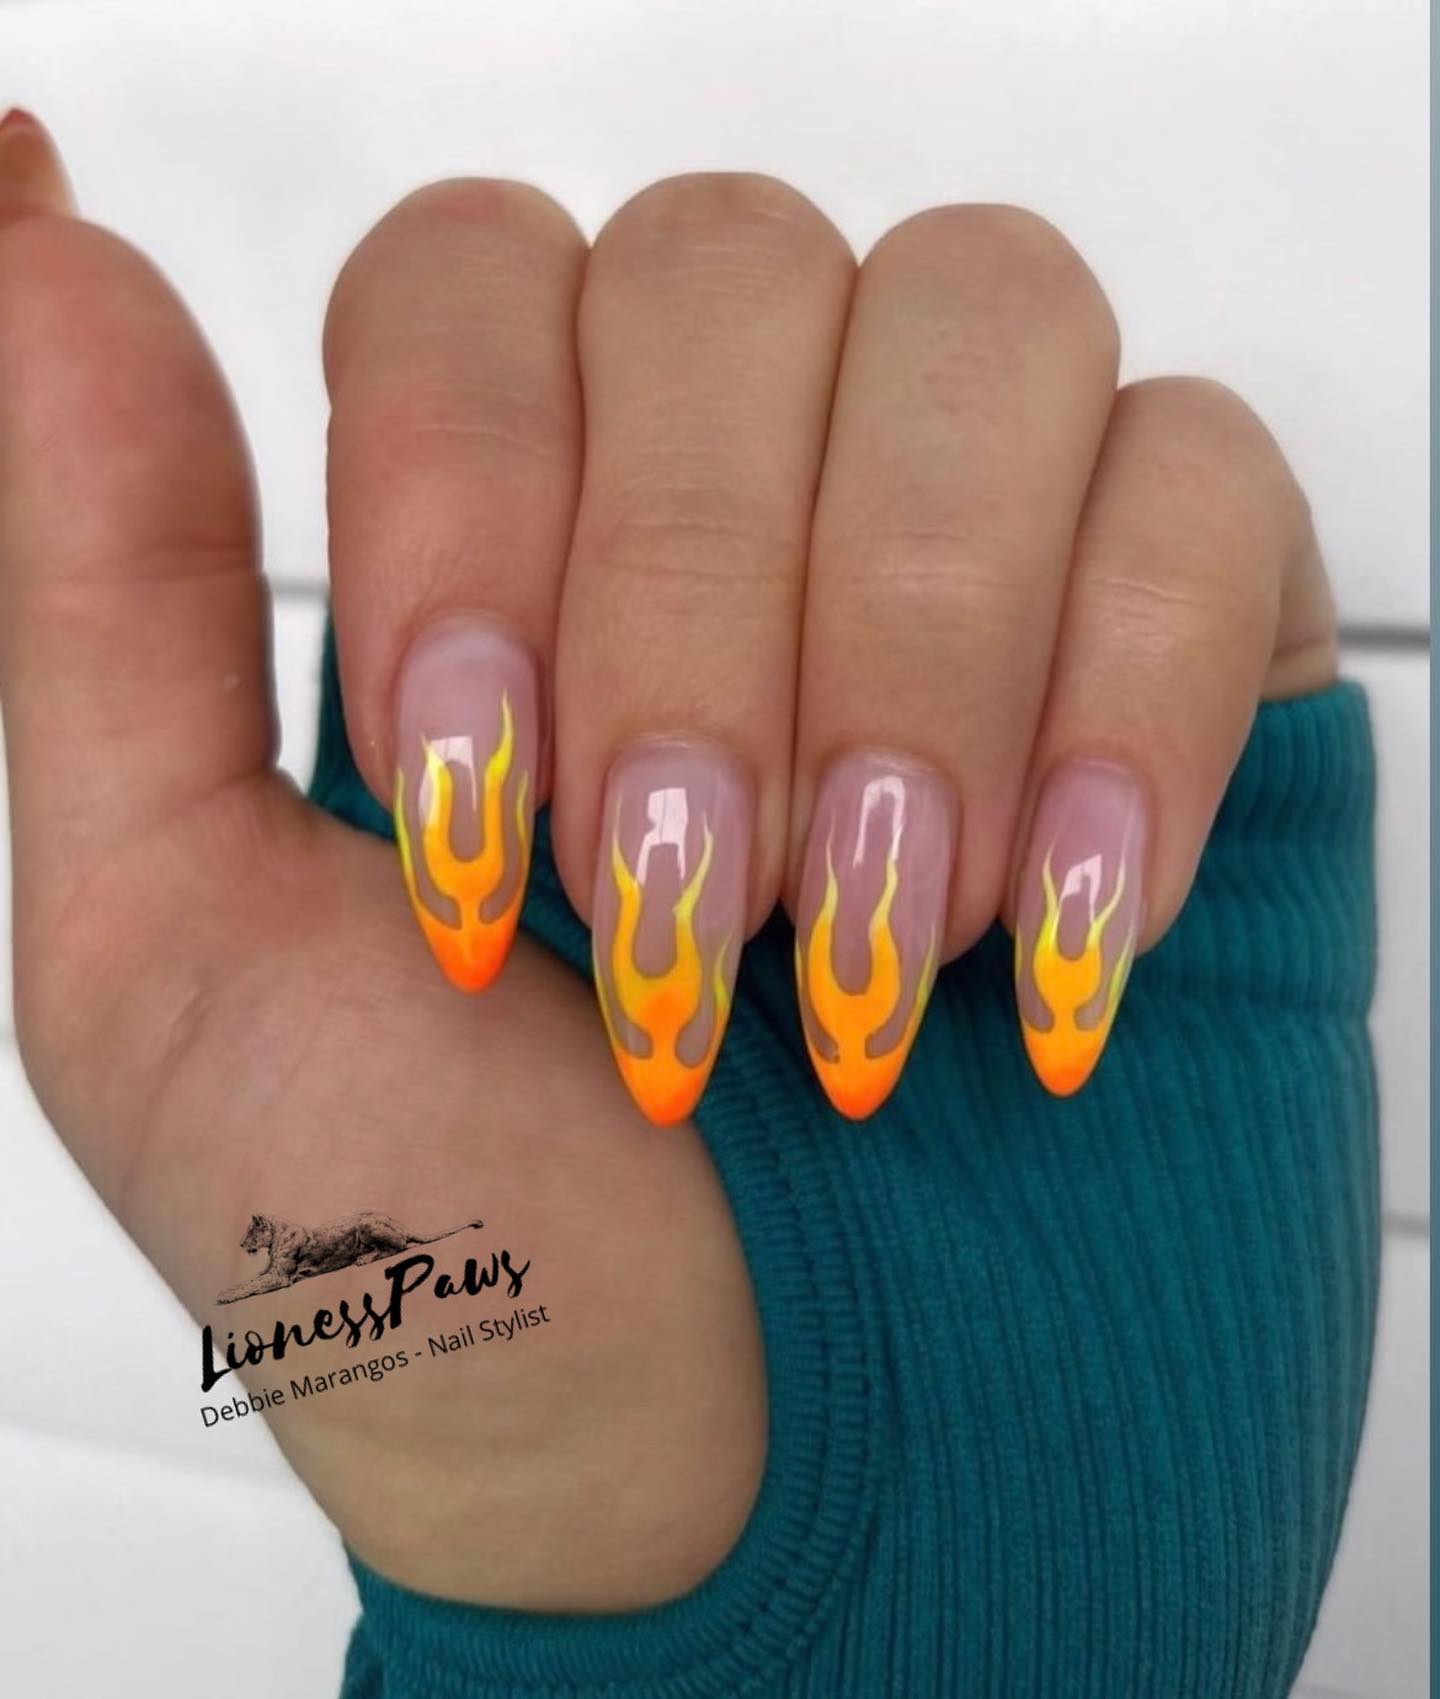 When it comes to talk about summer nails, there is no better color than orange. Let's go for a nude nail polish and draw orange flames that go lighter from tips. Everyone will realize your nails and want to check them closely.